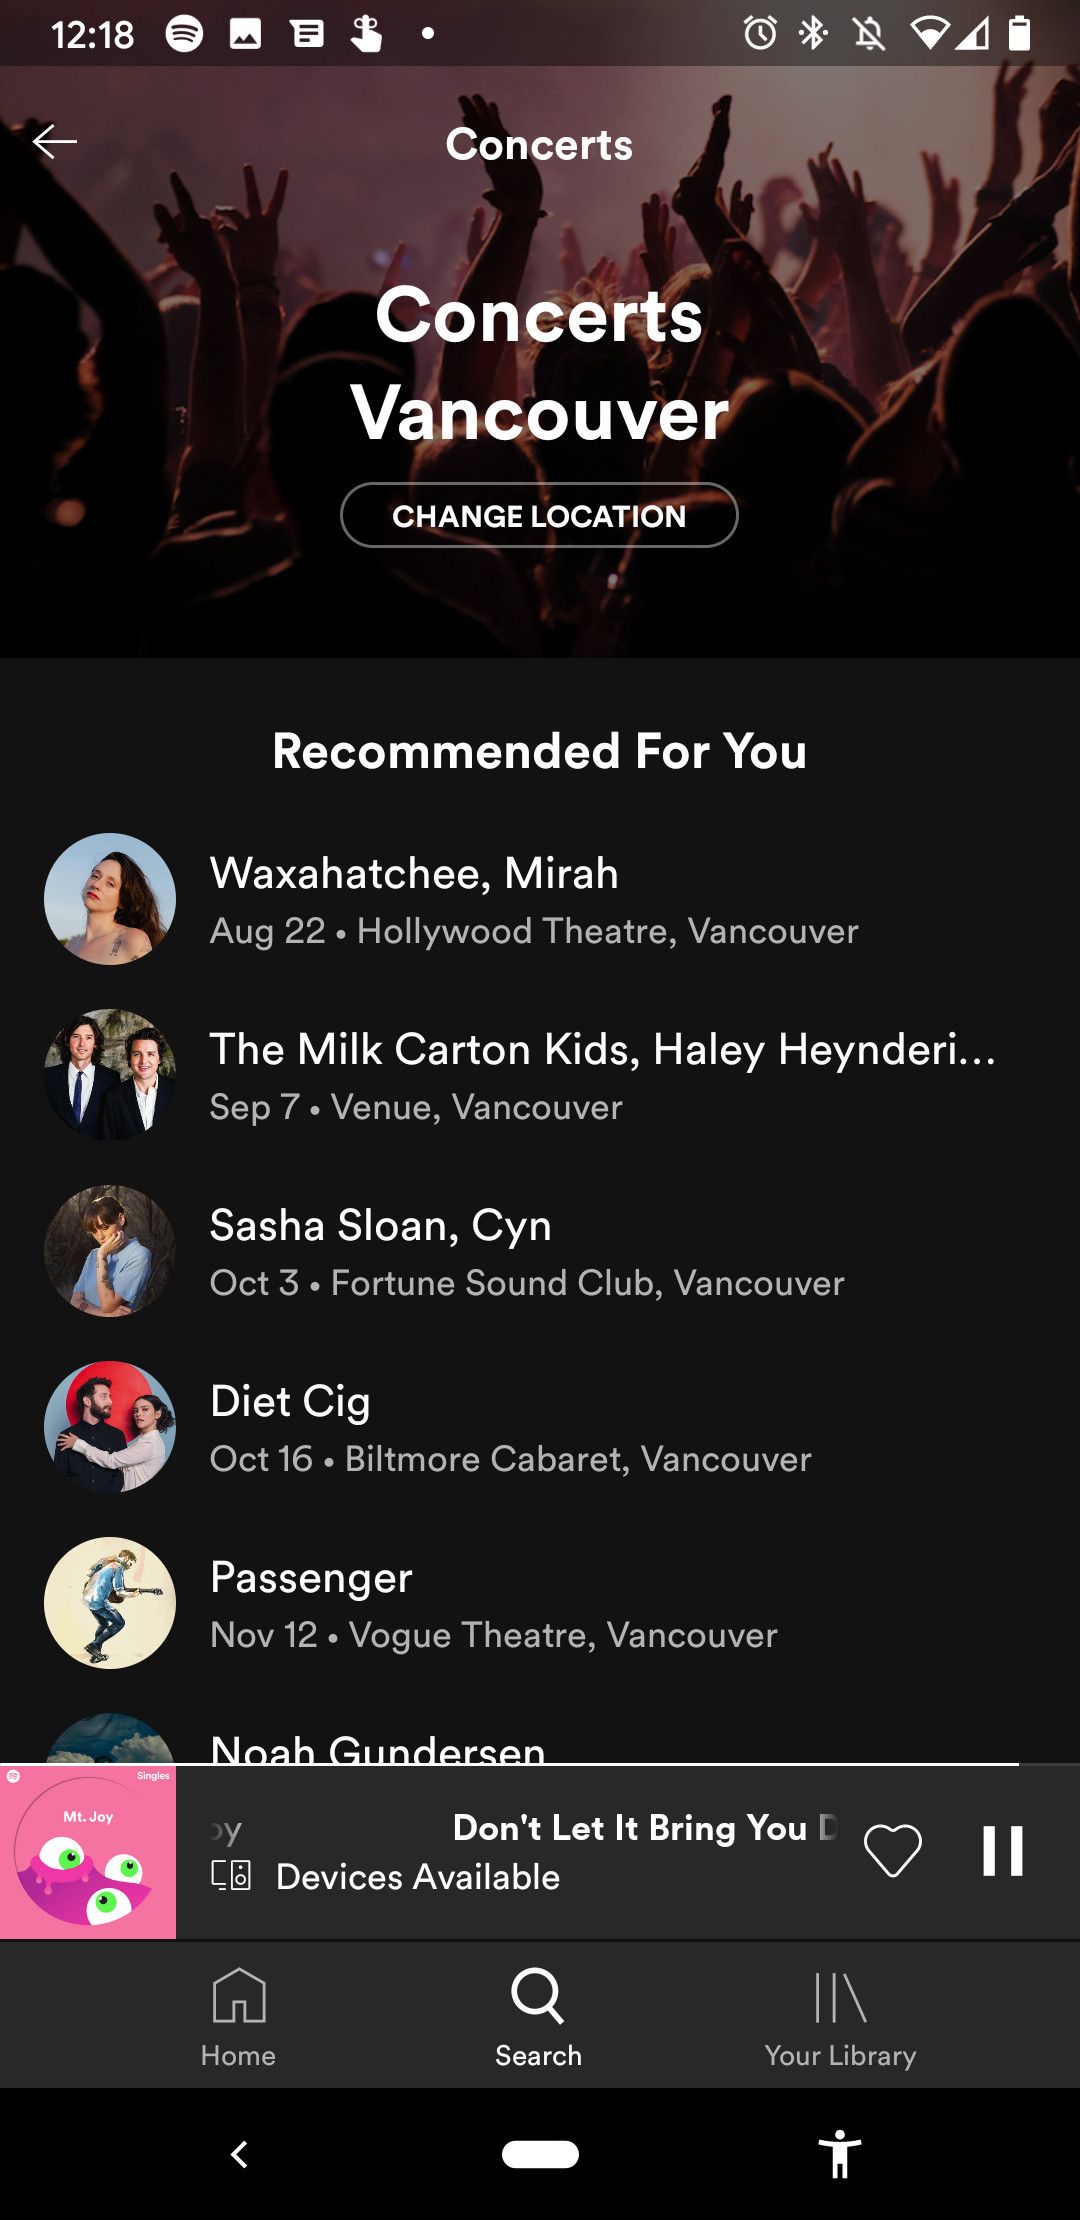 A screenshot of Spotify upcoming concerts in Vancouver used to illustrate feature differences between Tidal vs Spotify.